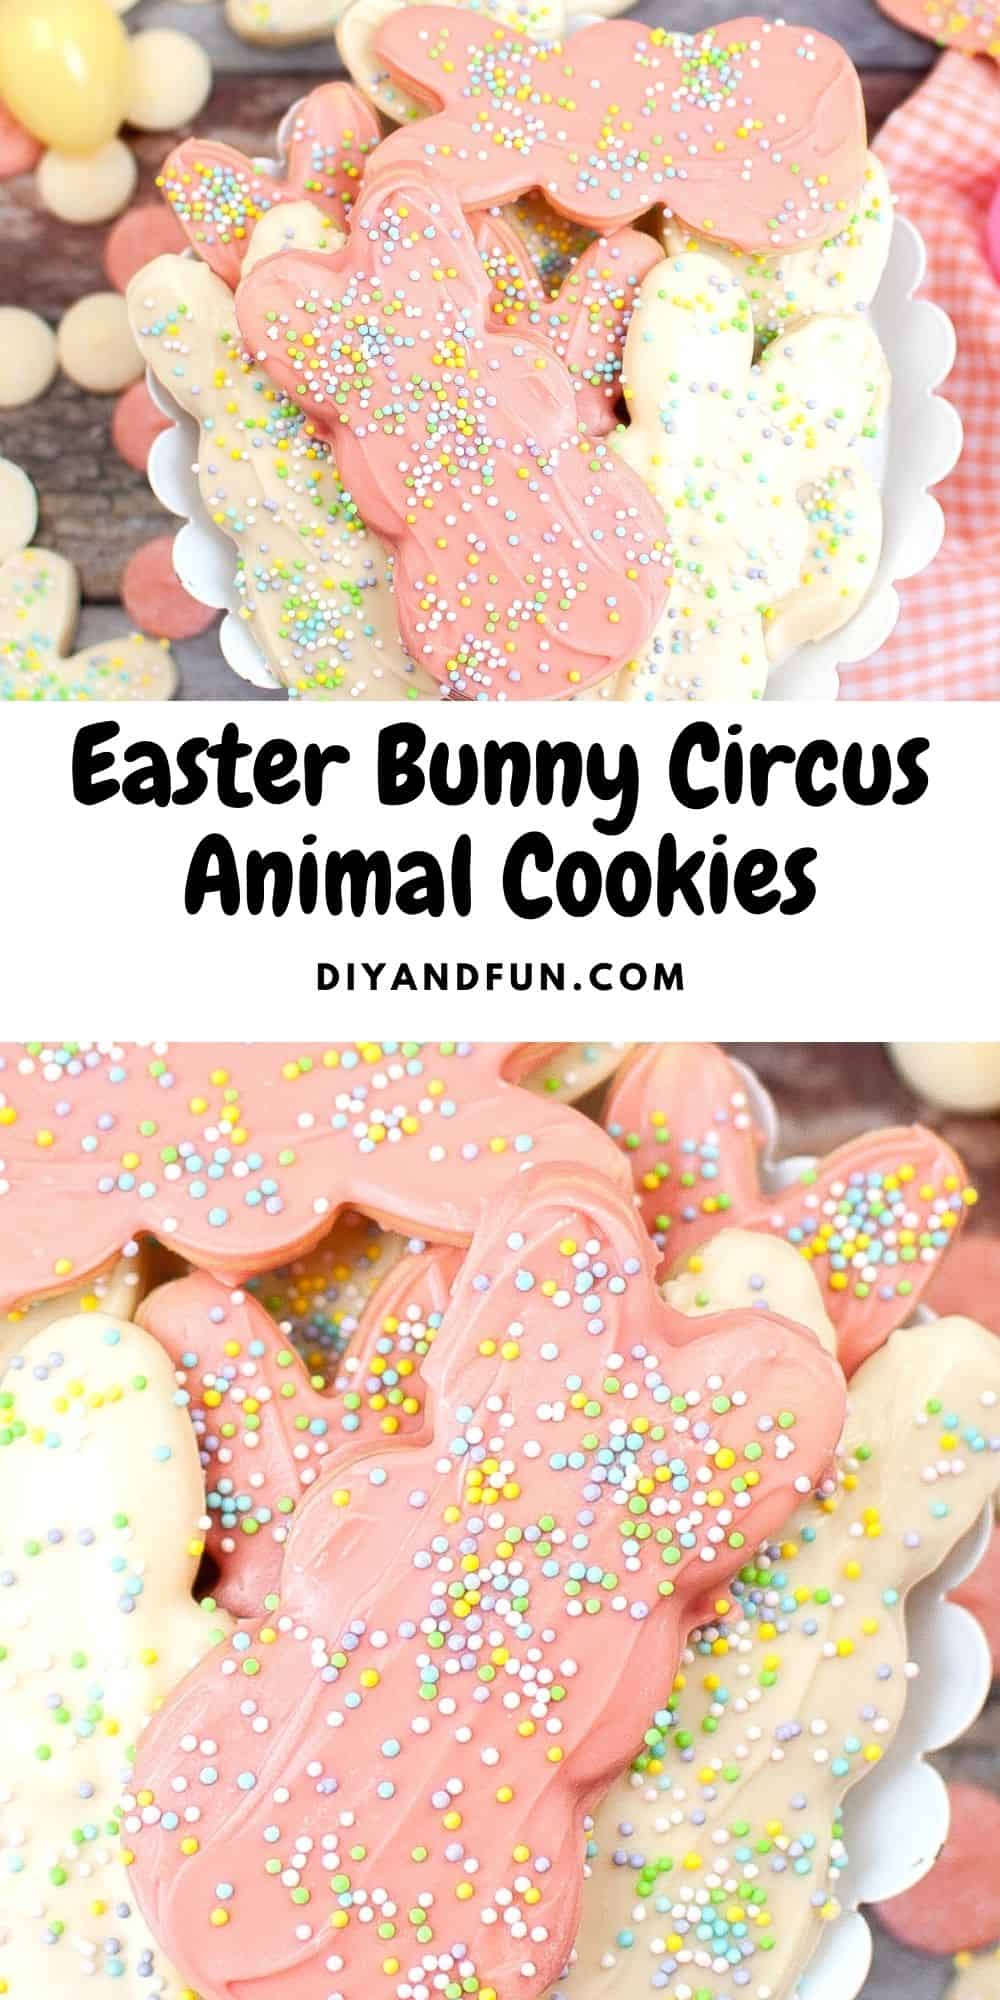 Easter Bunny Circus Animal Cookies, a tasty and easy recipe for chocolate coated cookies with an Easter spring theme.